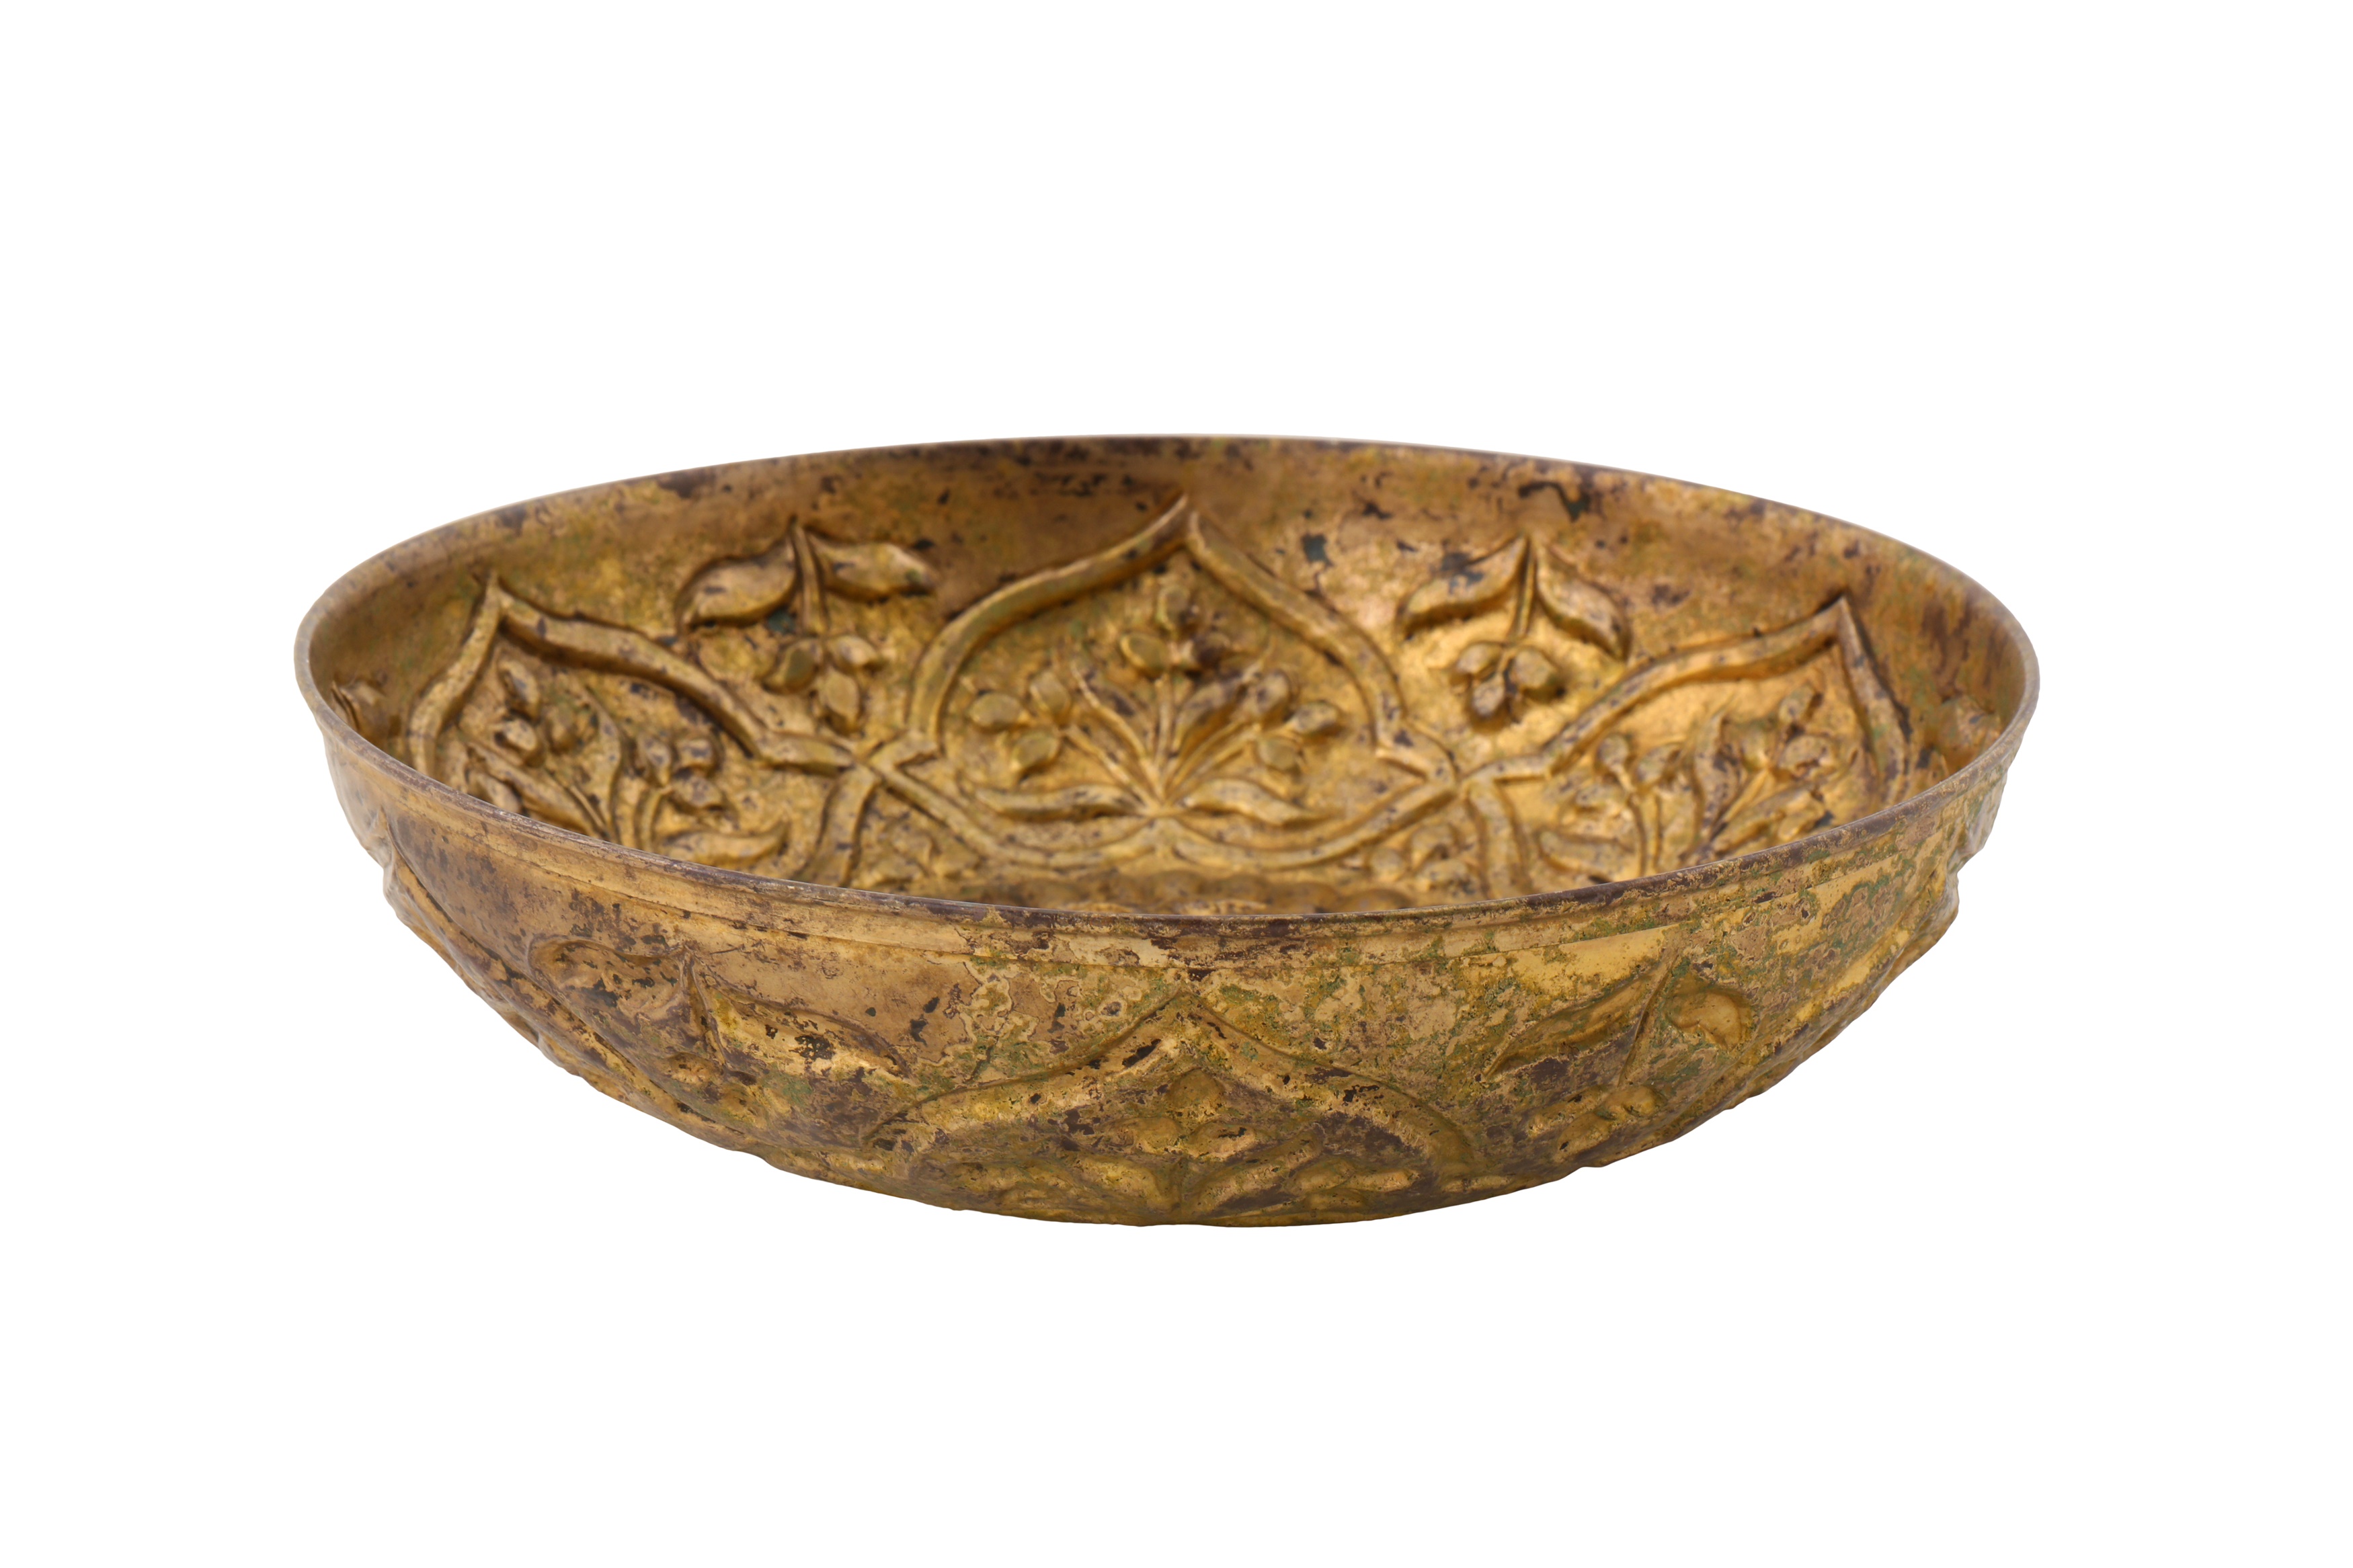 A POSSIBLY 18TH CENTURY OTTOMAN HAMMAM BOWL COPPER GILT - Image 2 of 4